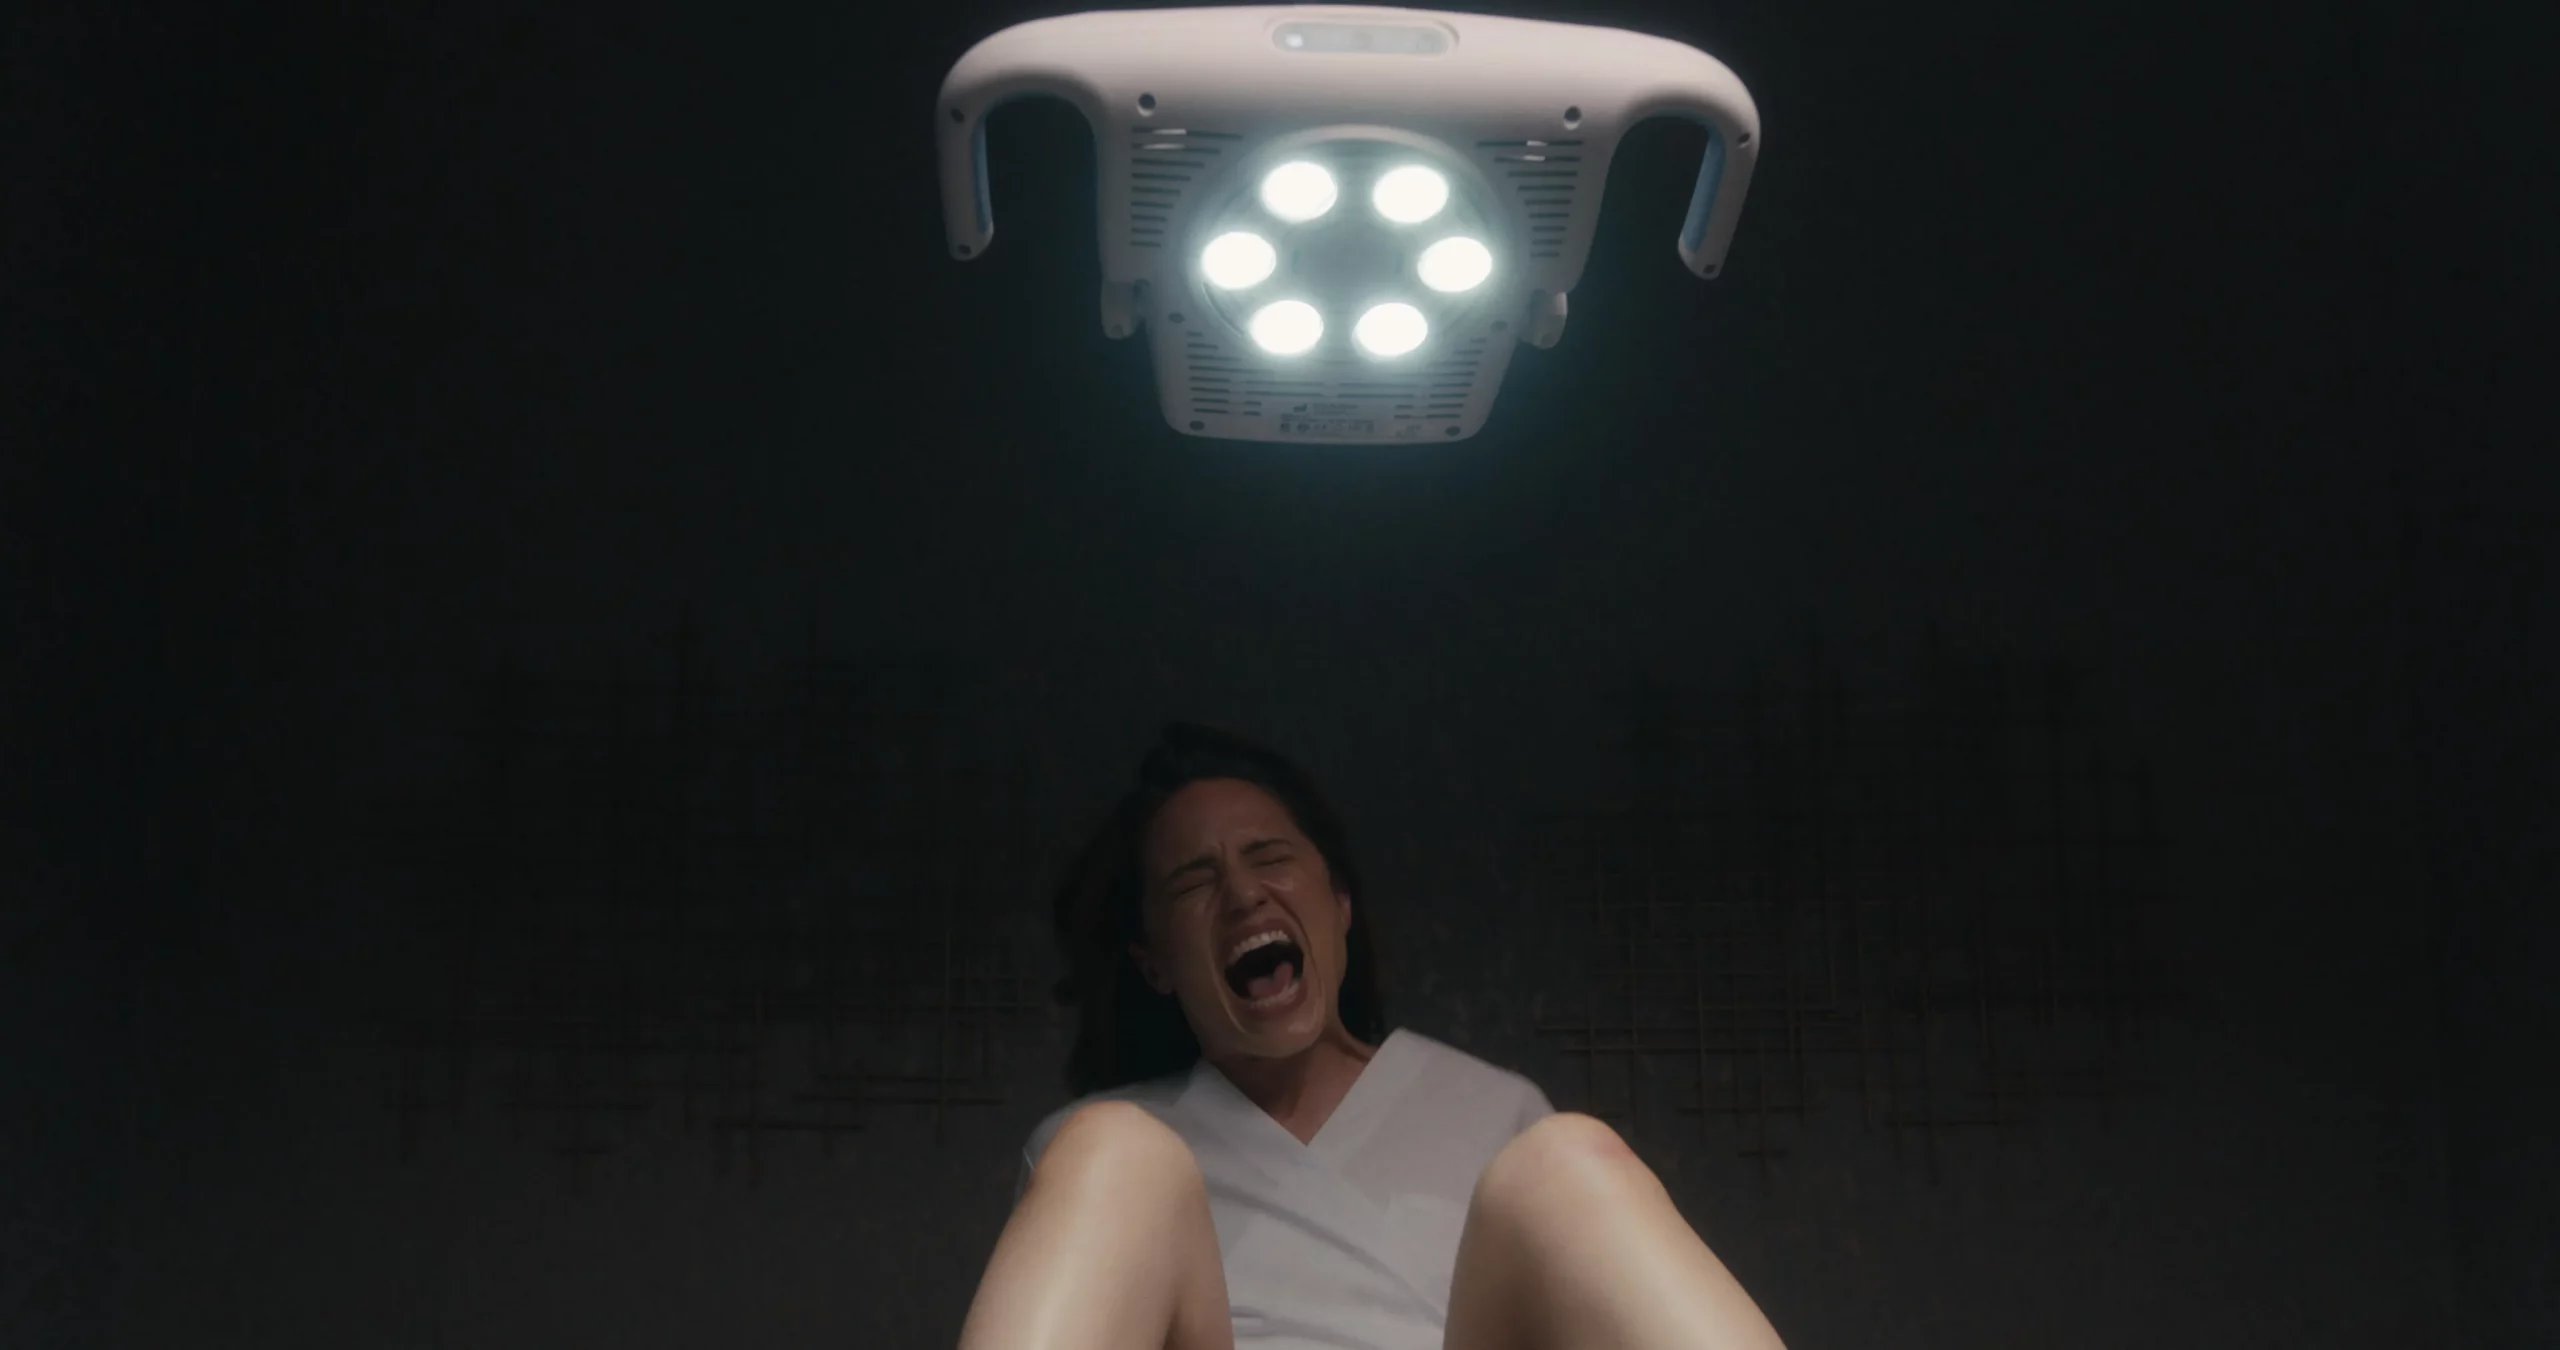 A woman screams in pain underneath a sterile exam room lighting.